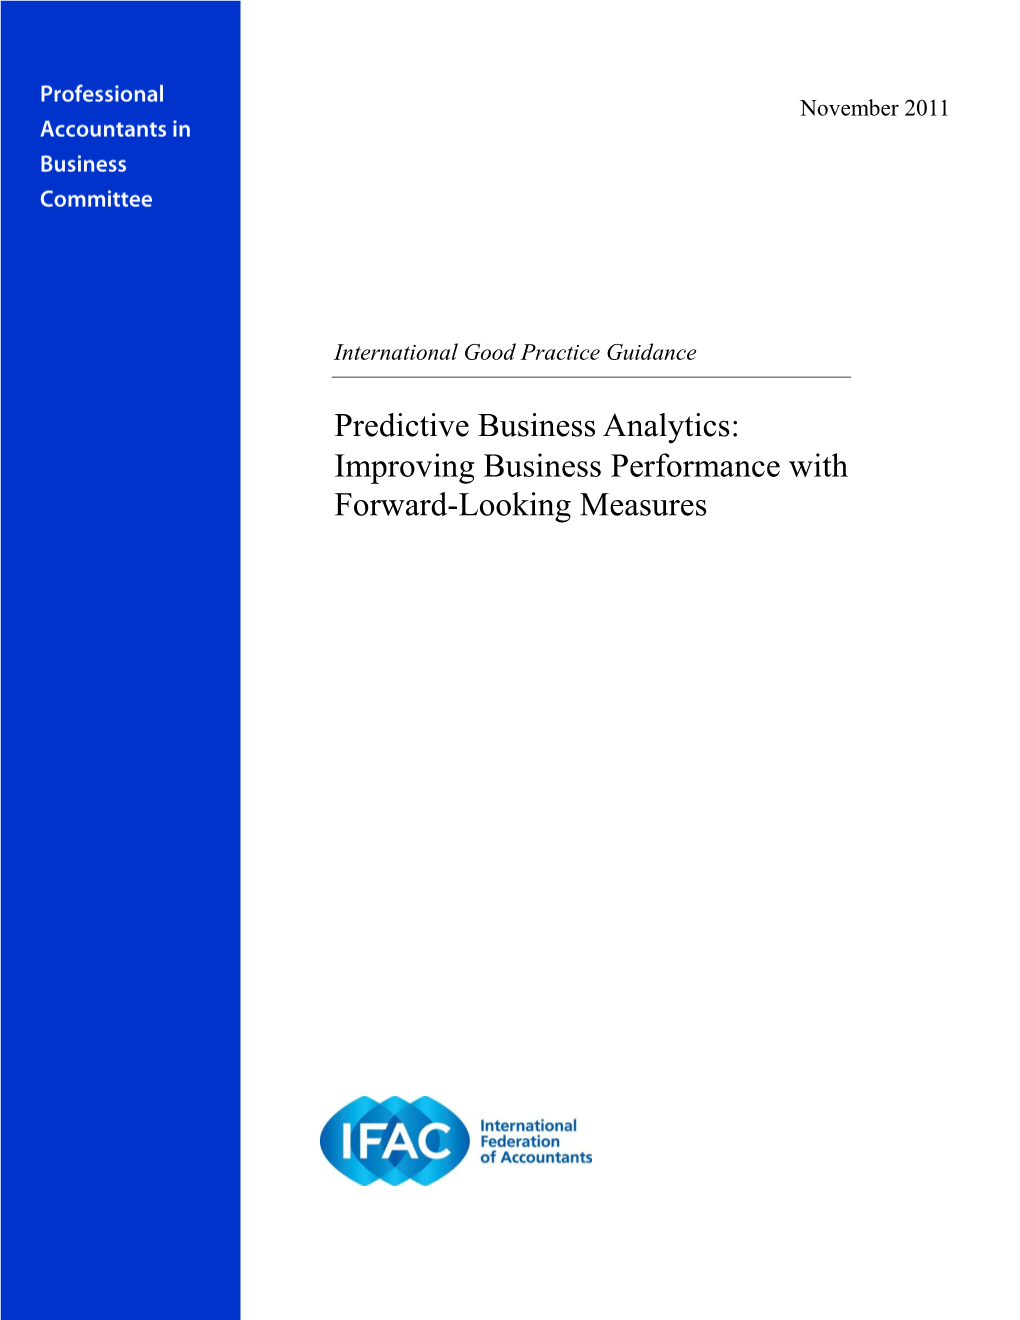 Improving Business Performance with Forward-Looking Measures